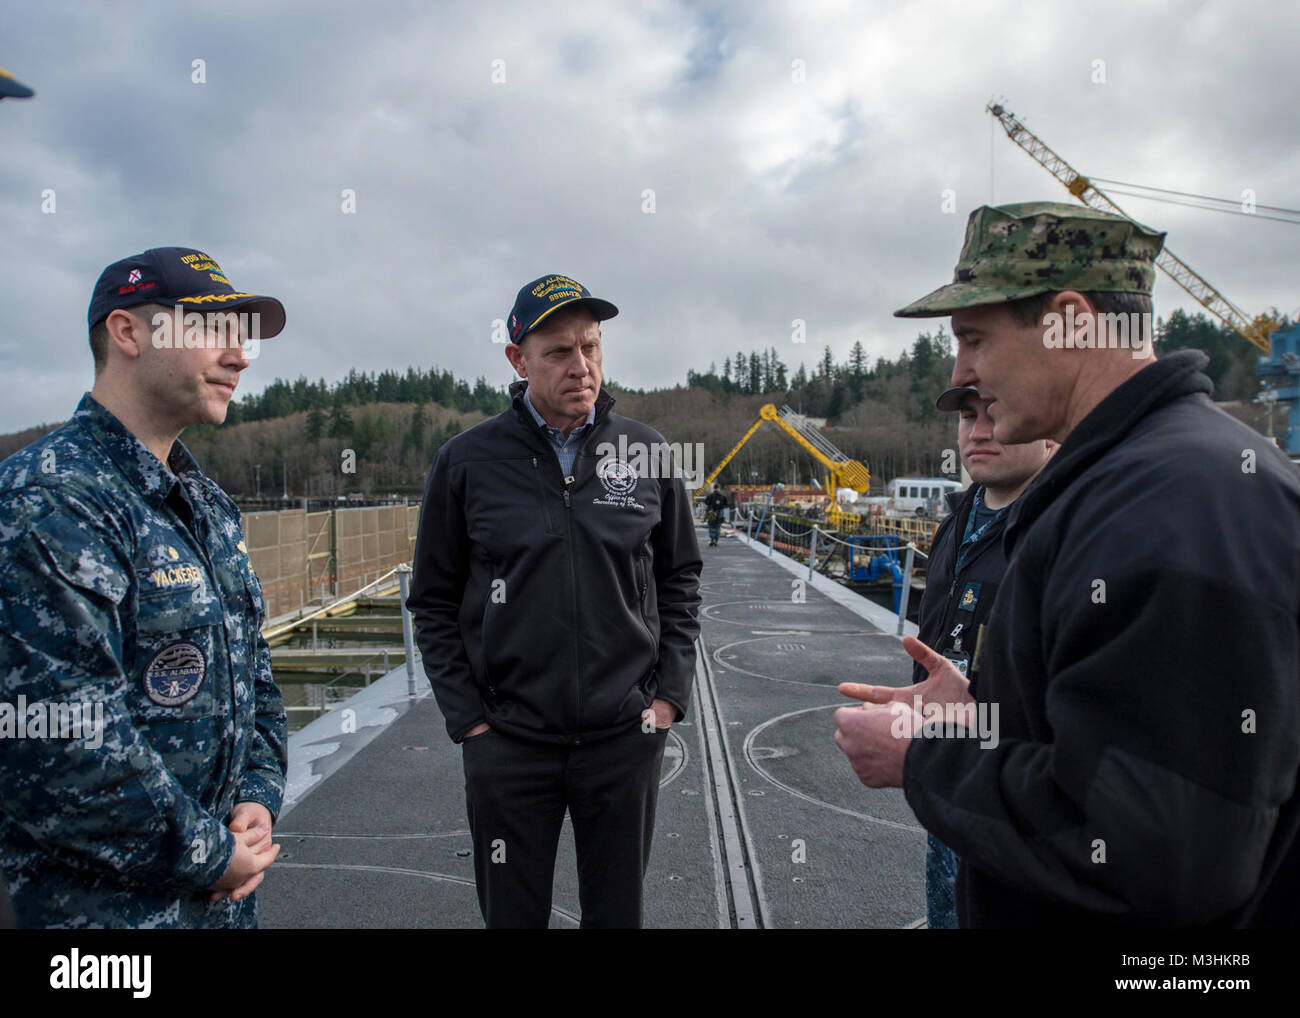 BANGOR, Wash. (Feb. 9, 2018) - Cmdr. Jeffery Yackeren, commanding officer Ohio-class ballistic missile submarine USS Alabama (SSBN 731), gives tour to Deputy Secretary of Defense Patrick Shanahan and facilities assigned to Commander Submarine Group 9 at Naval Base Kitsap-Bangor to see the operations of one leg of the nuclear triad. (U.S. Navy Stock Photo